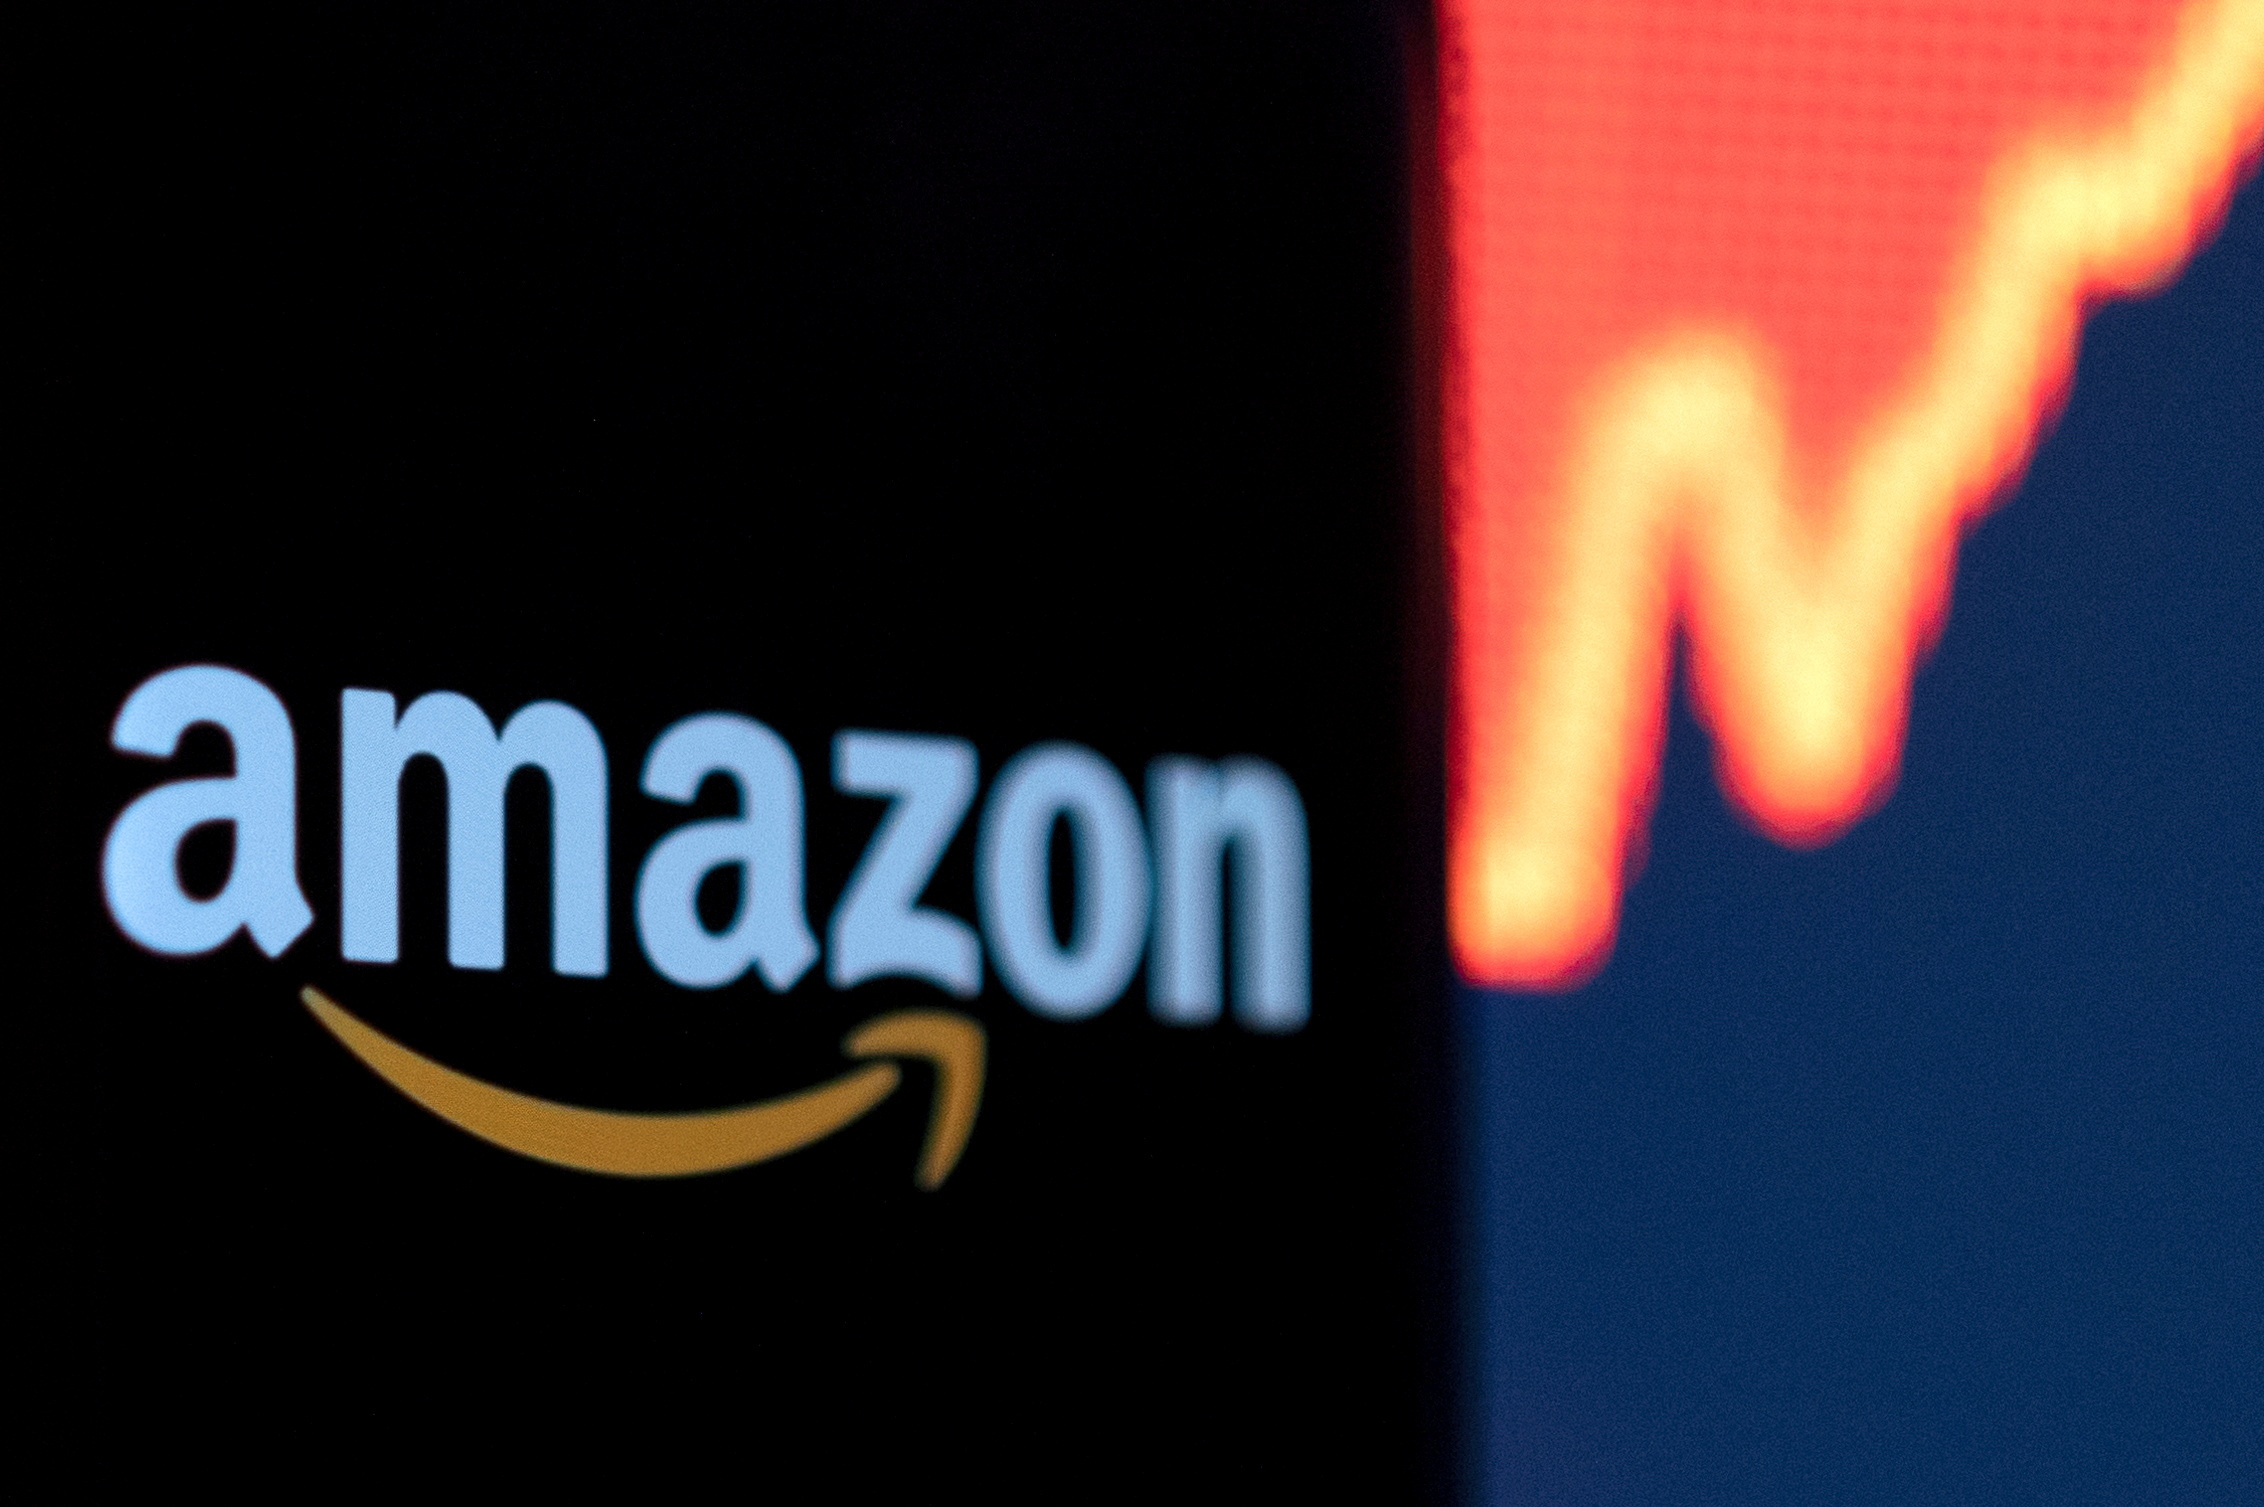 Illustration shows Amazon logo and a rising stock graph